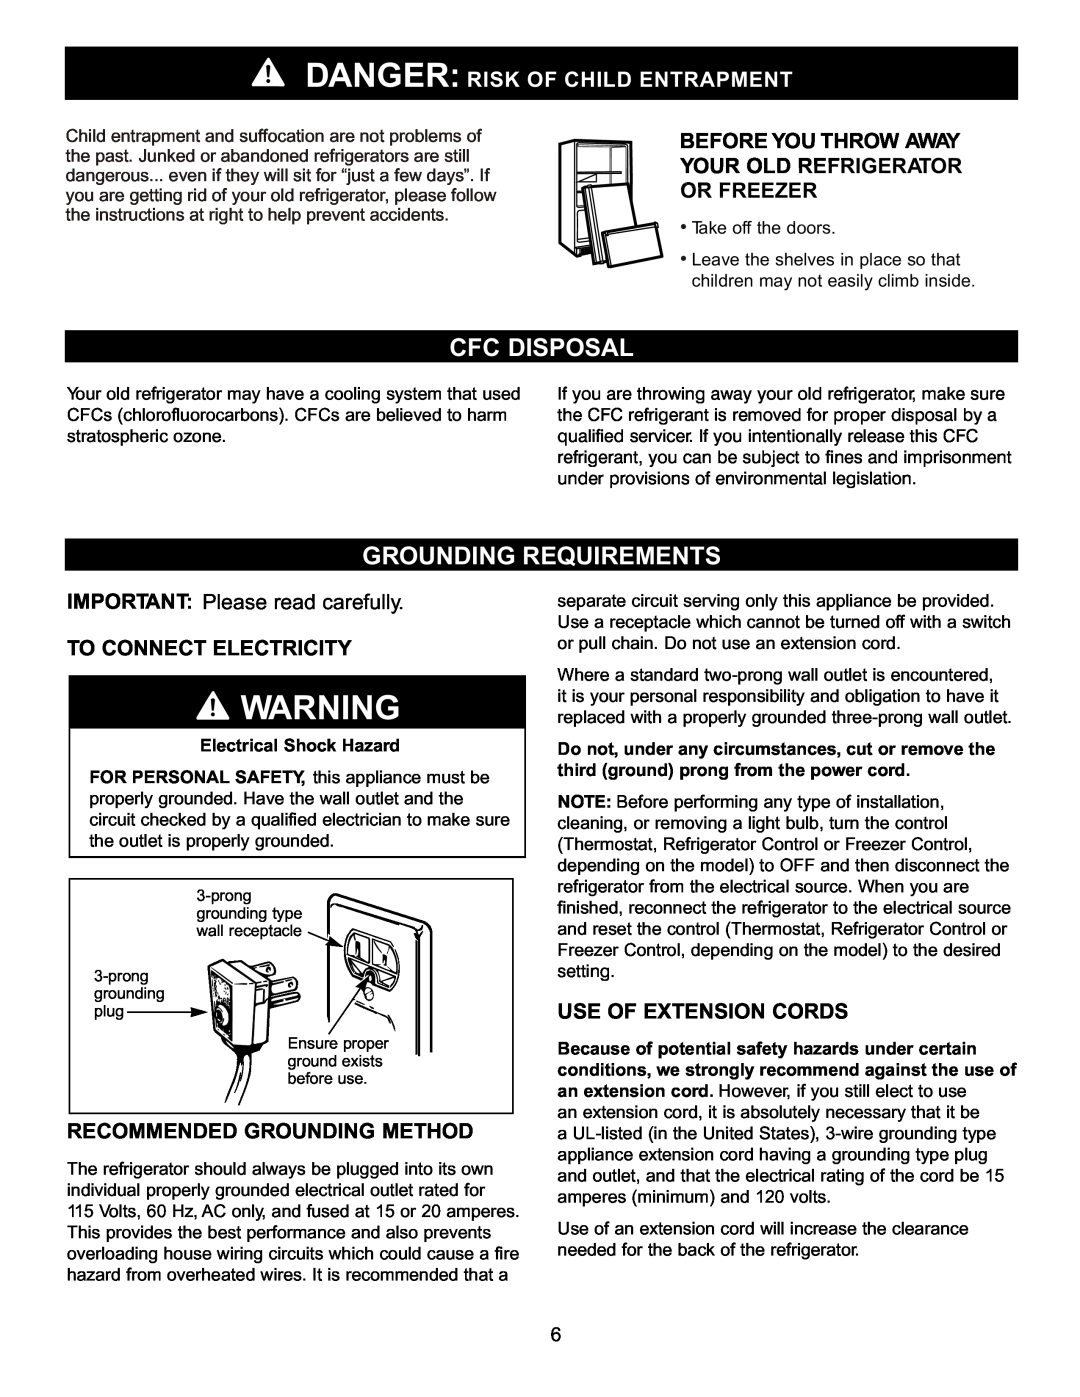 LG Electronics LDN2273 Cfc Disposal, Grounding Requirements, Danger: Risk Of Child Entrapment, To Connect Electricity 